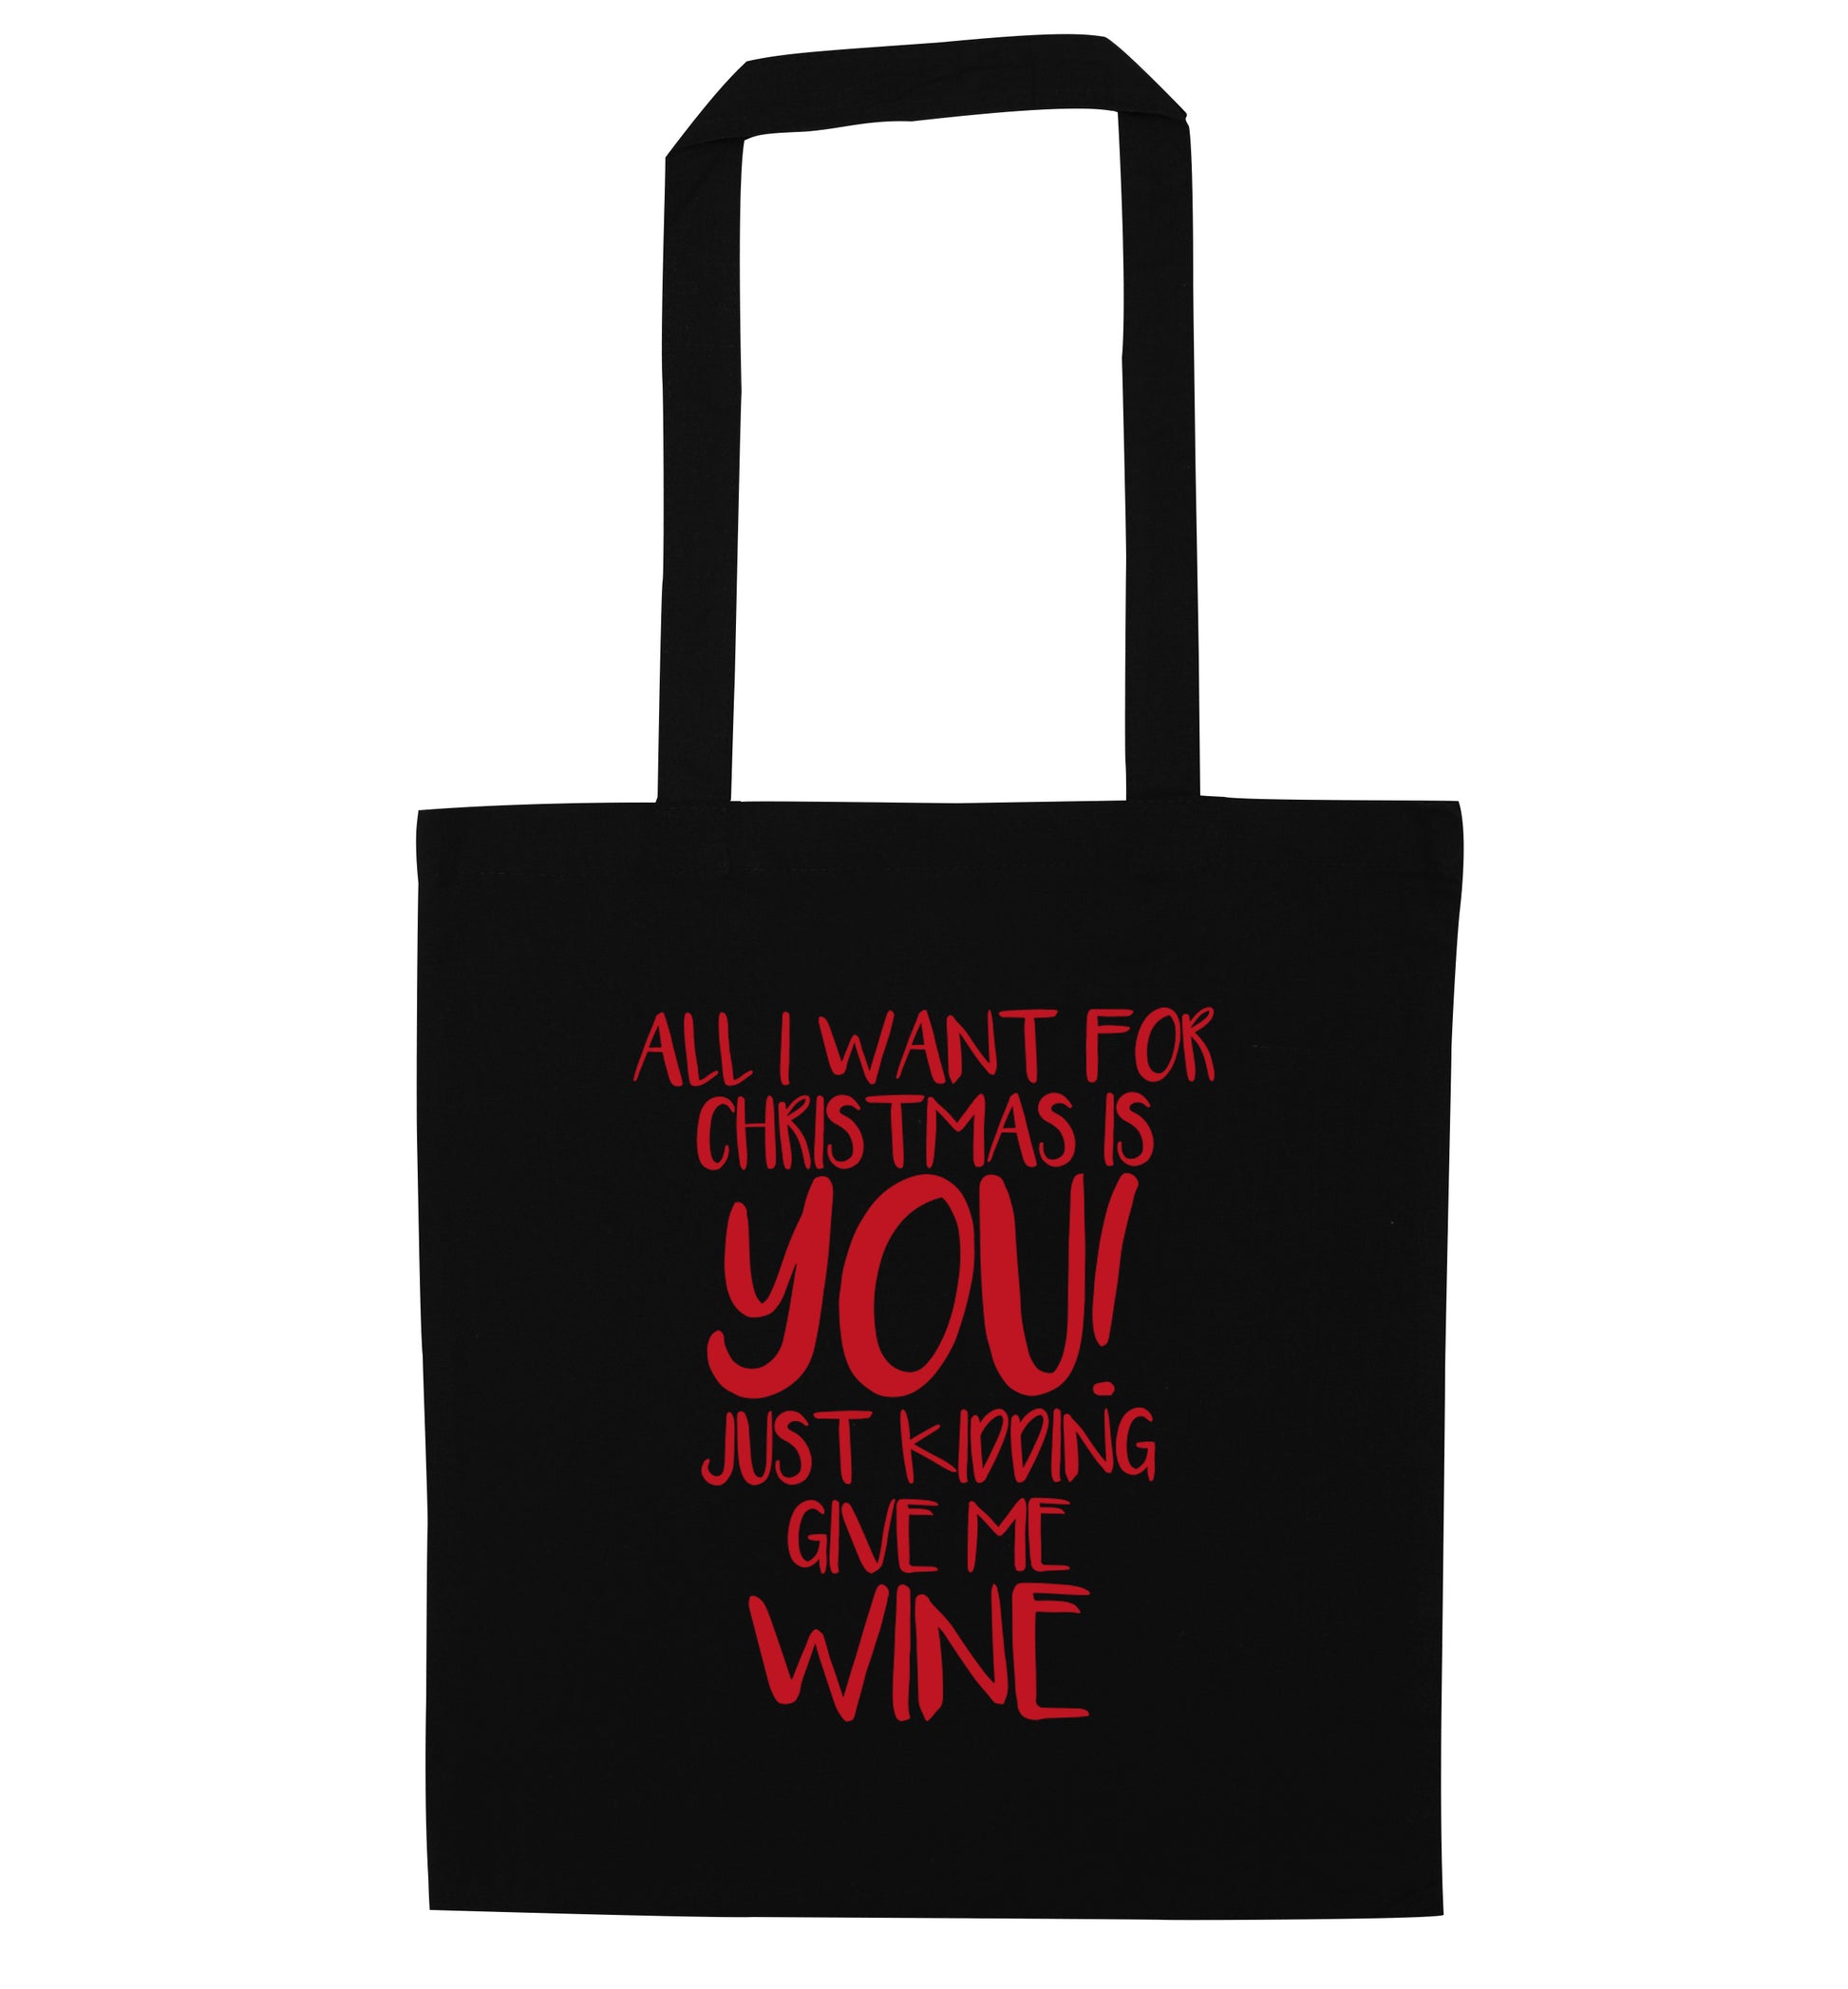 All I want for christmas is you just kidding give me the wine black tote bag